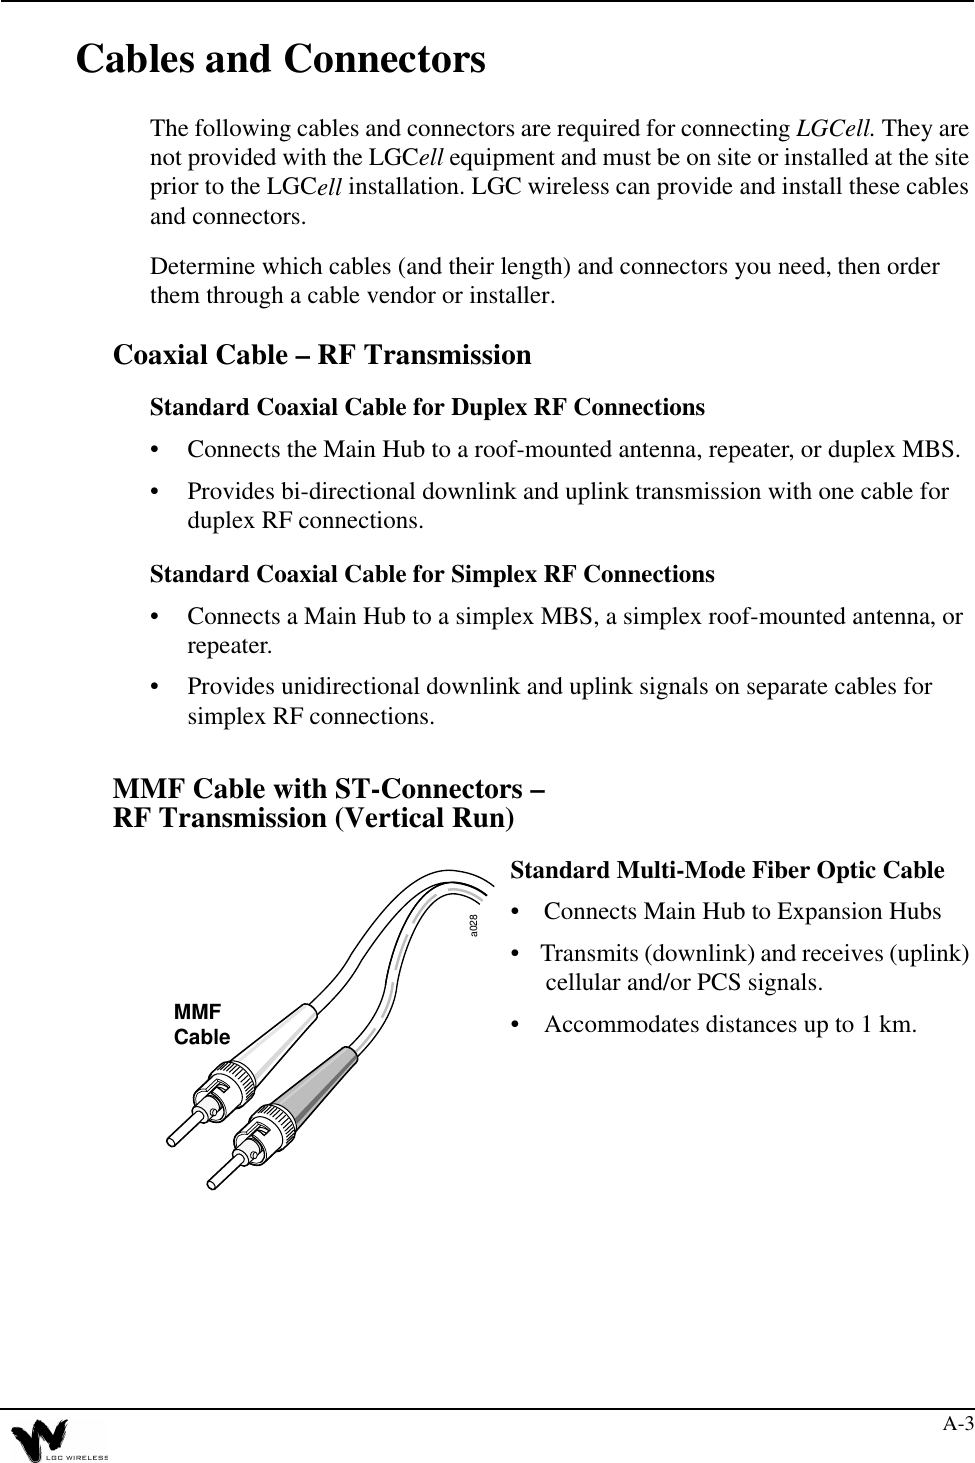 A-3Cables and ConnectorsThe following cables and connectors are required for connecting LGCell. They are not provided with the LGCell equipment and must be on site or installed at the site prior to the LGCell installation. LGC wireless can provide and install these cables and connectors. Determine which cables (and their length) and connectors you need, then order them through a cable vendor or installer.Coaxial Cable – RF TransmissionStandard Coaxial Cable for Duplex RF Connections•Connects the Main Hub to a roof-mounted antenna, repeater, or duplex MBS.•Provides bi-directional downlink and uplink transmission with one cable for duplex RF connections.Standard Coaxial Cable for Simplex RF Connections•Connects a Main Hub to a simplex MBS, a simplex roof-mounted antenna, or repeater.•Provides unidirectional downlink and uplink signals on separate cables for simplex RF connections.MMF Cable with ST-Connectors –RF Transmission (Vertical Run)Standard Multi-Mode Fiber Optic Cable •    Connects Main Hub to Expansion Hubs•    Transmits (downlink) and receives (uplink) cellular and/or PCS signals.•    Accommodates distances up to 1 km.a028MMFCable